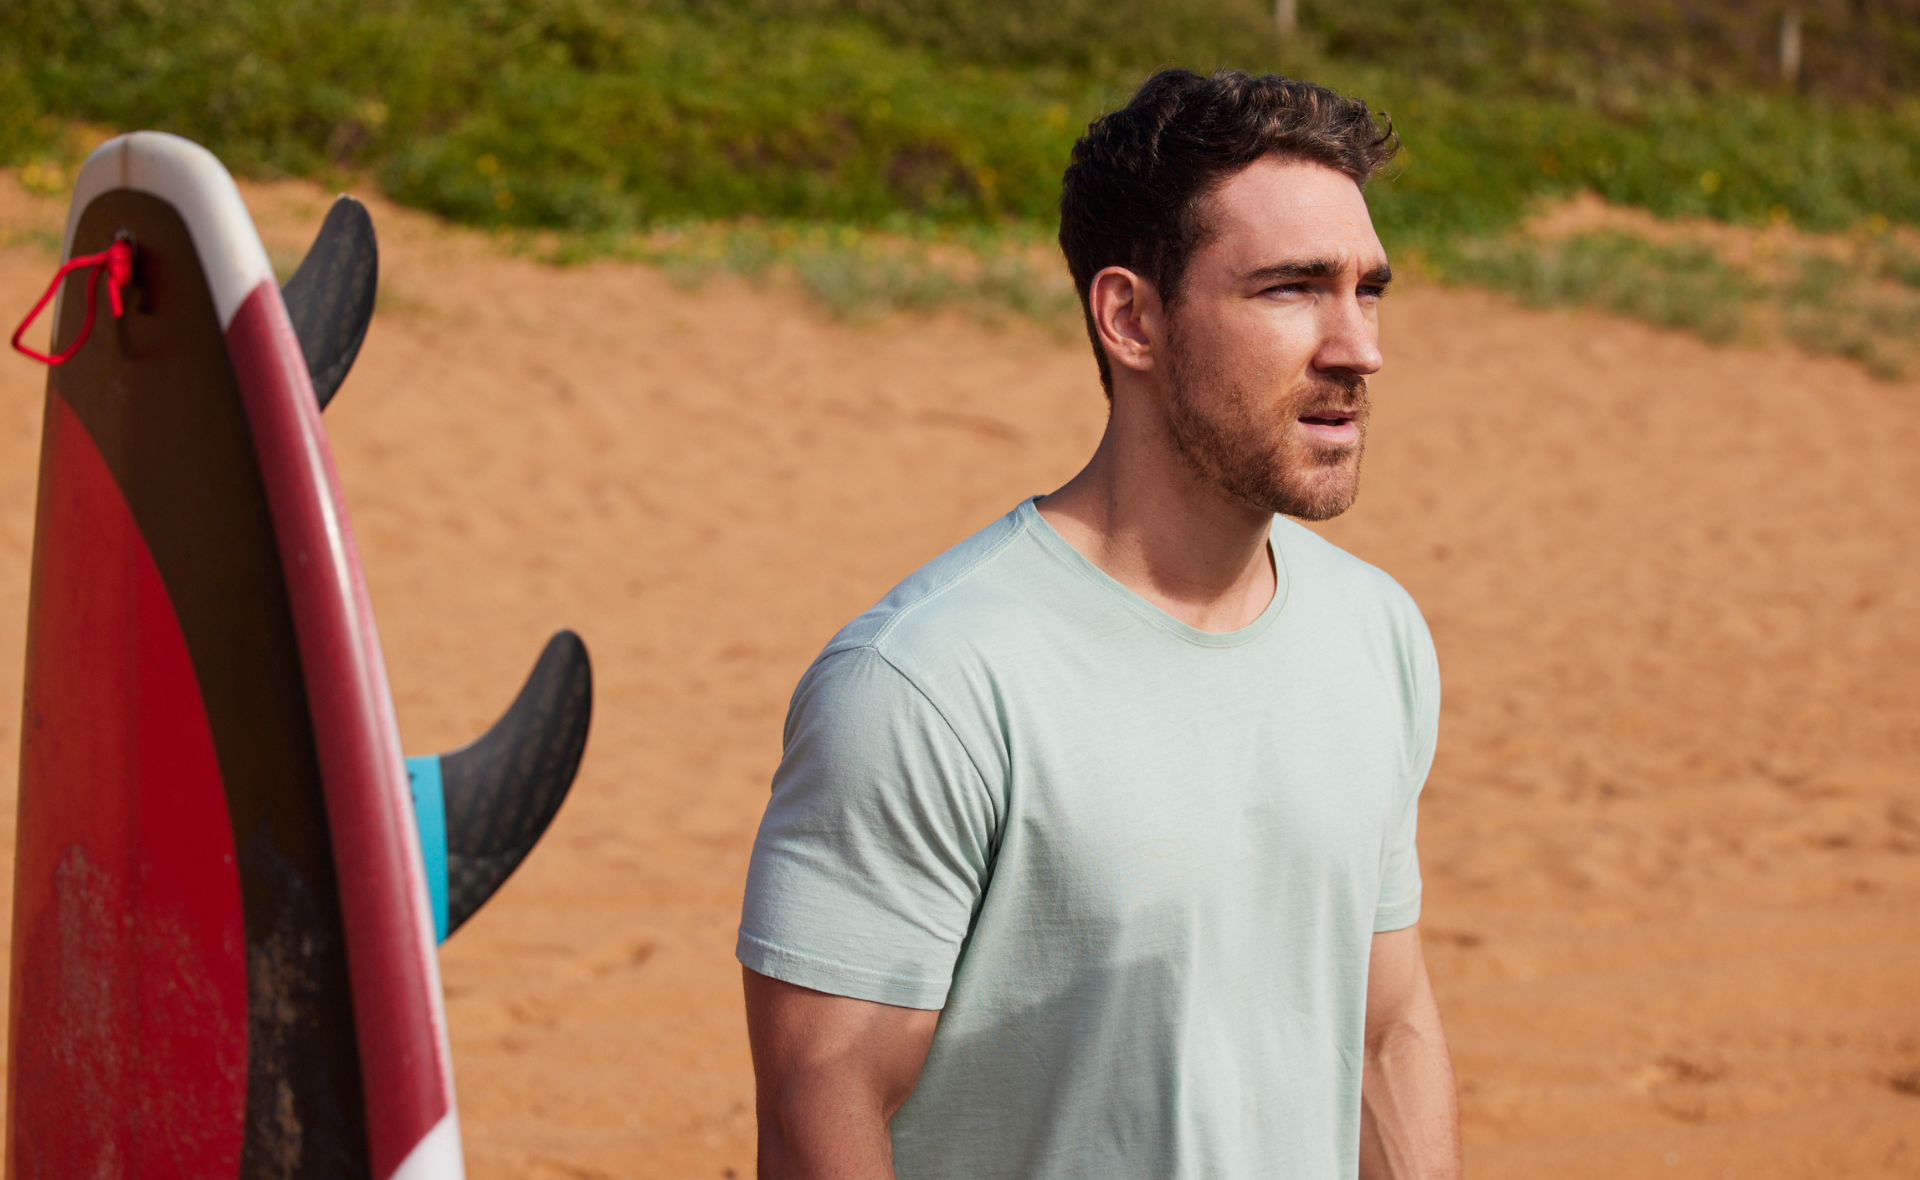 Home And Away Xander’s injury is worse than we expected, will he be saved in time?